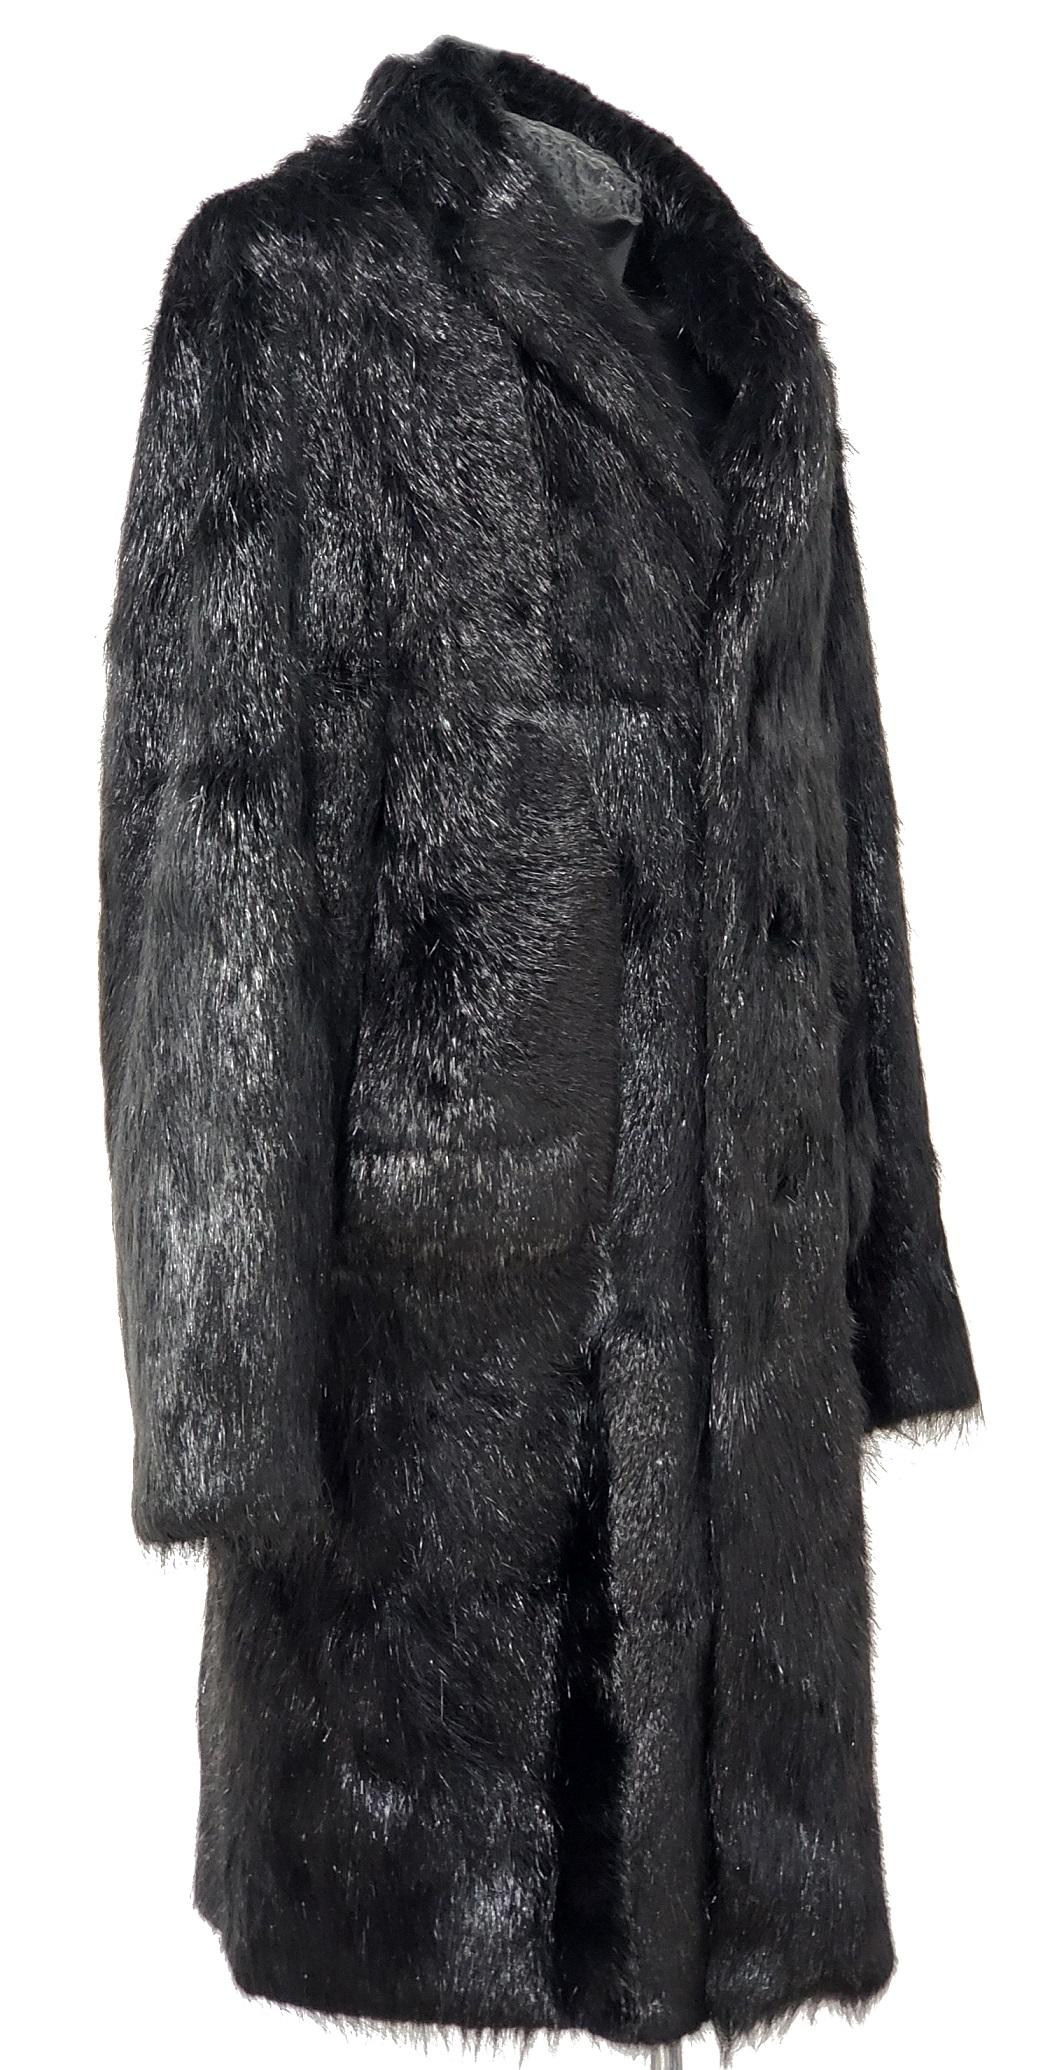 Roberto Cavalli 
Beaver Fur Coat

With its luxurious textures and chic style, this gorgeous coat will add panache to any wardrobe. 
Measures:
shoulder to shoulder - 22